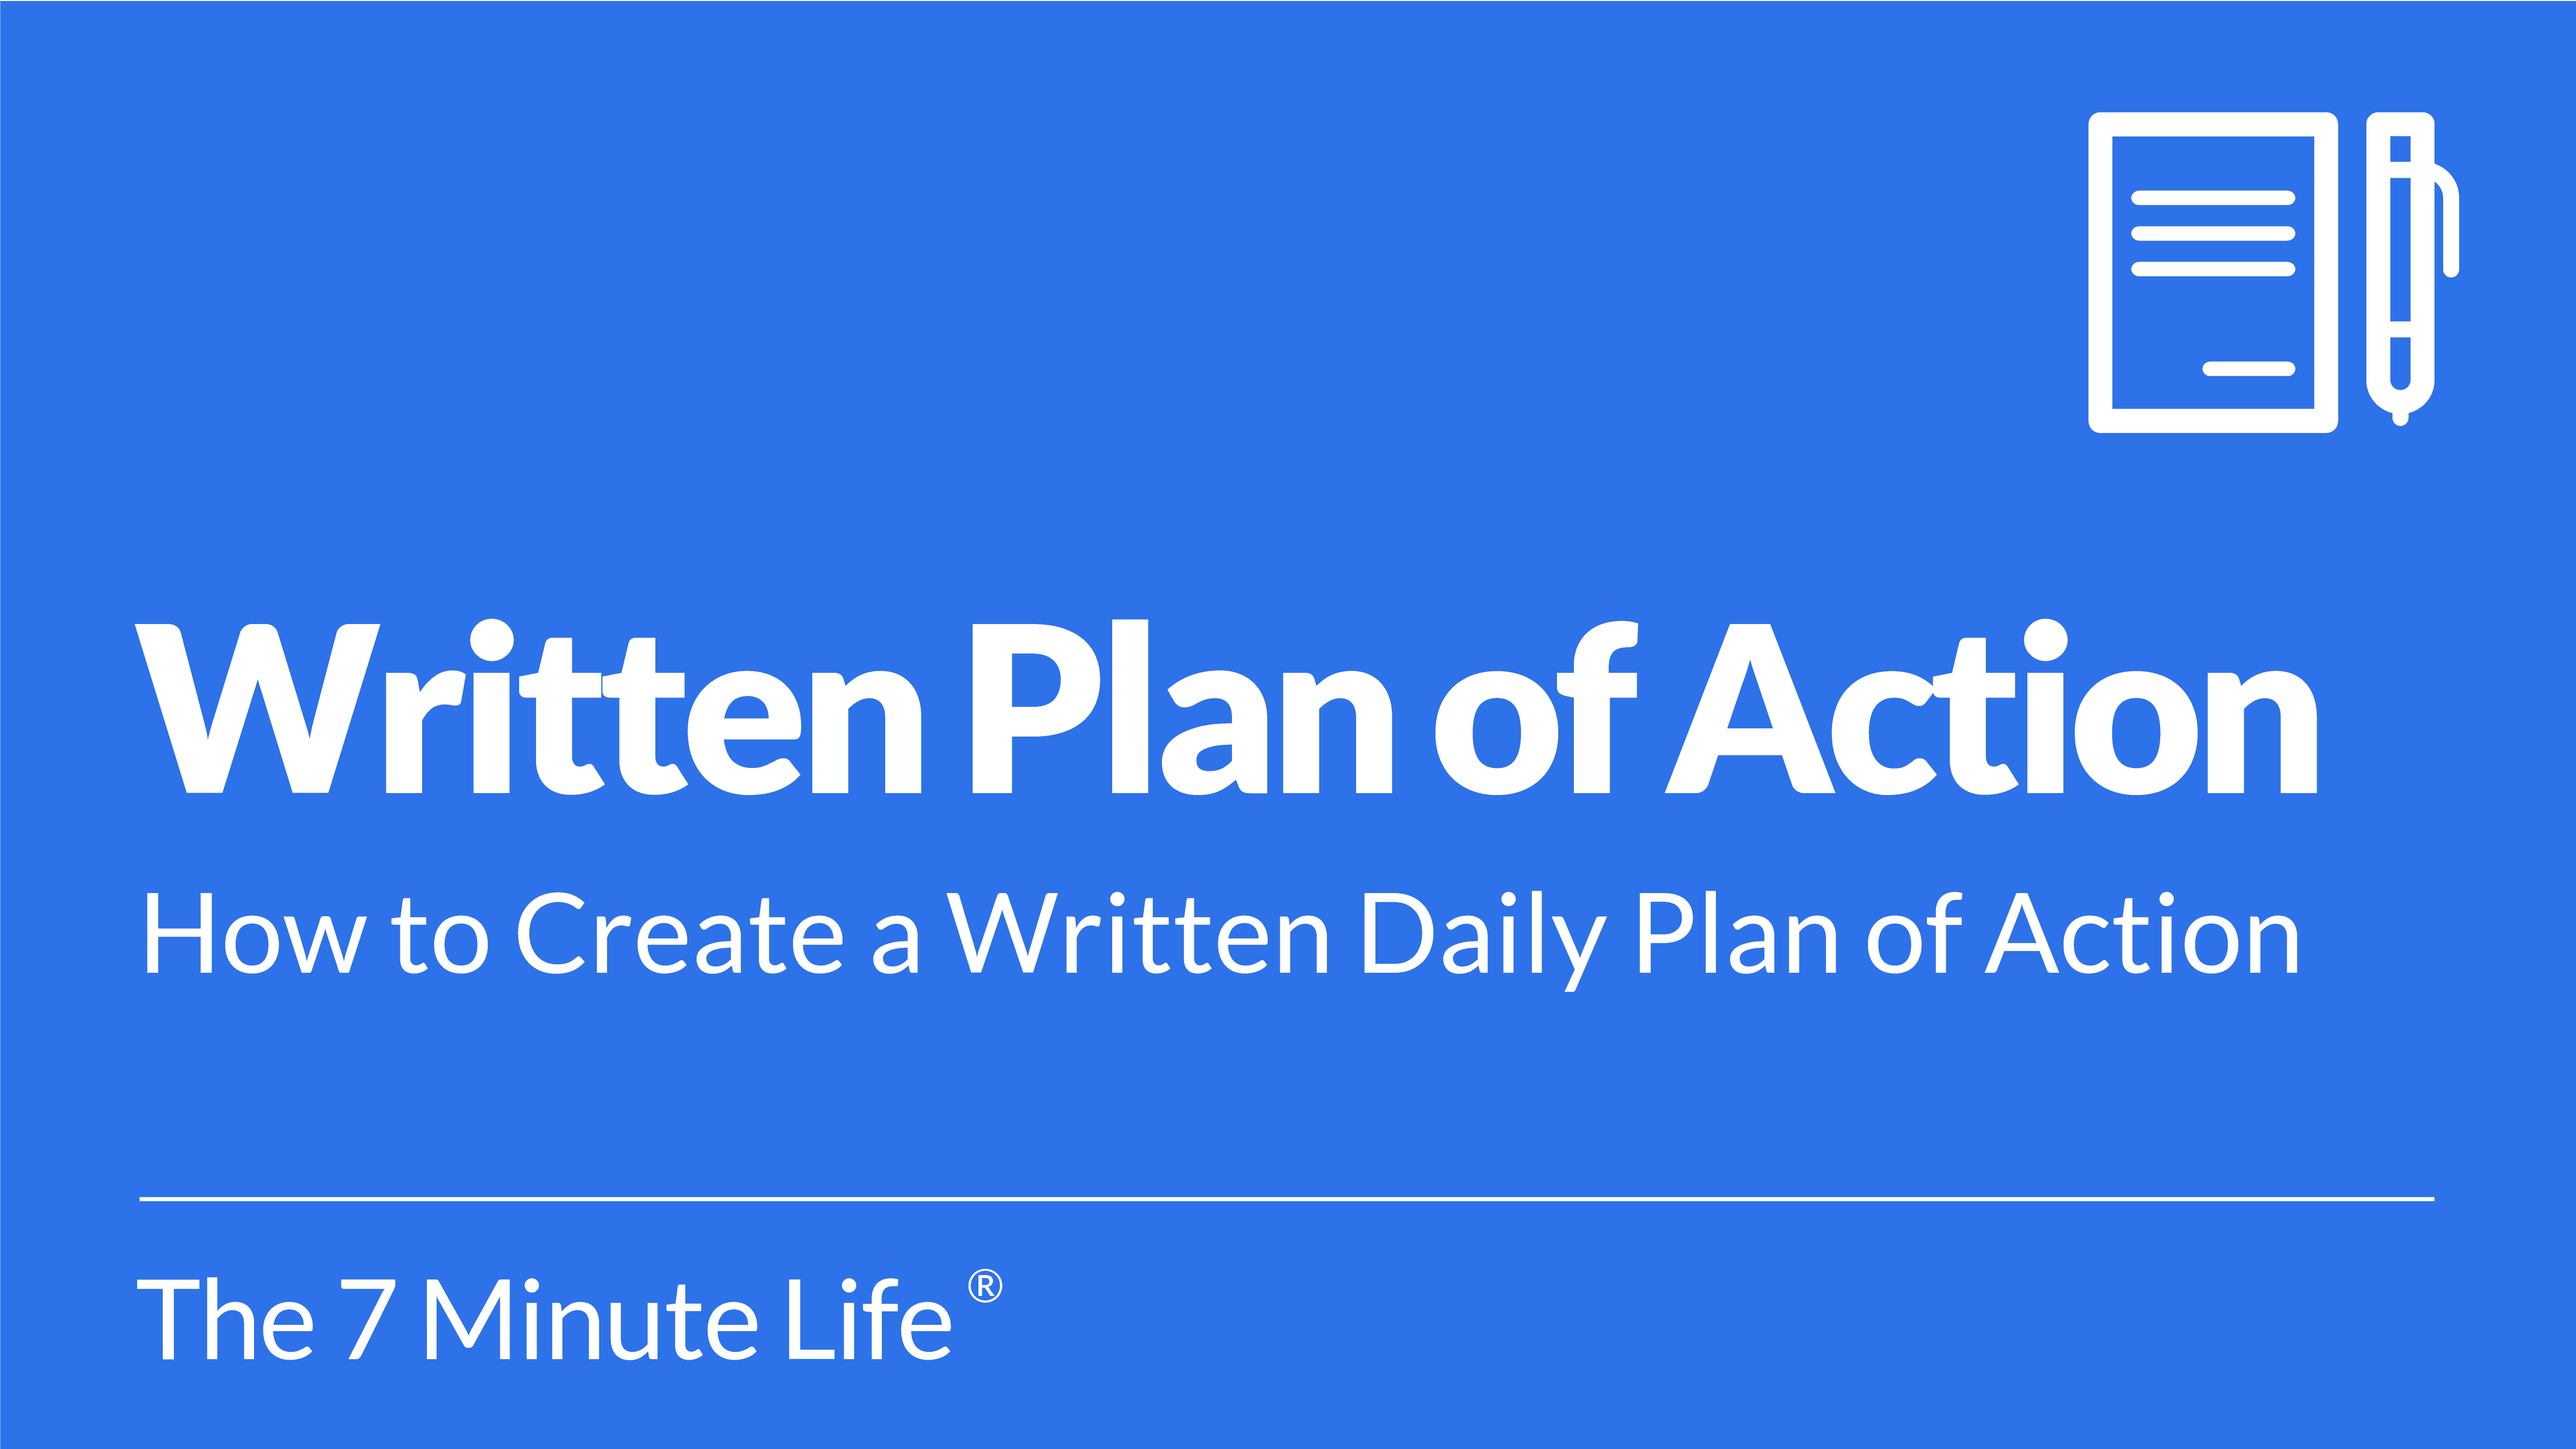 Written Daily Plan of Action